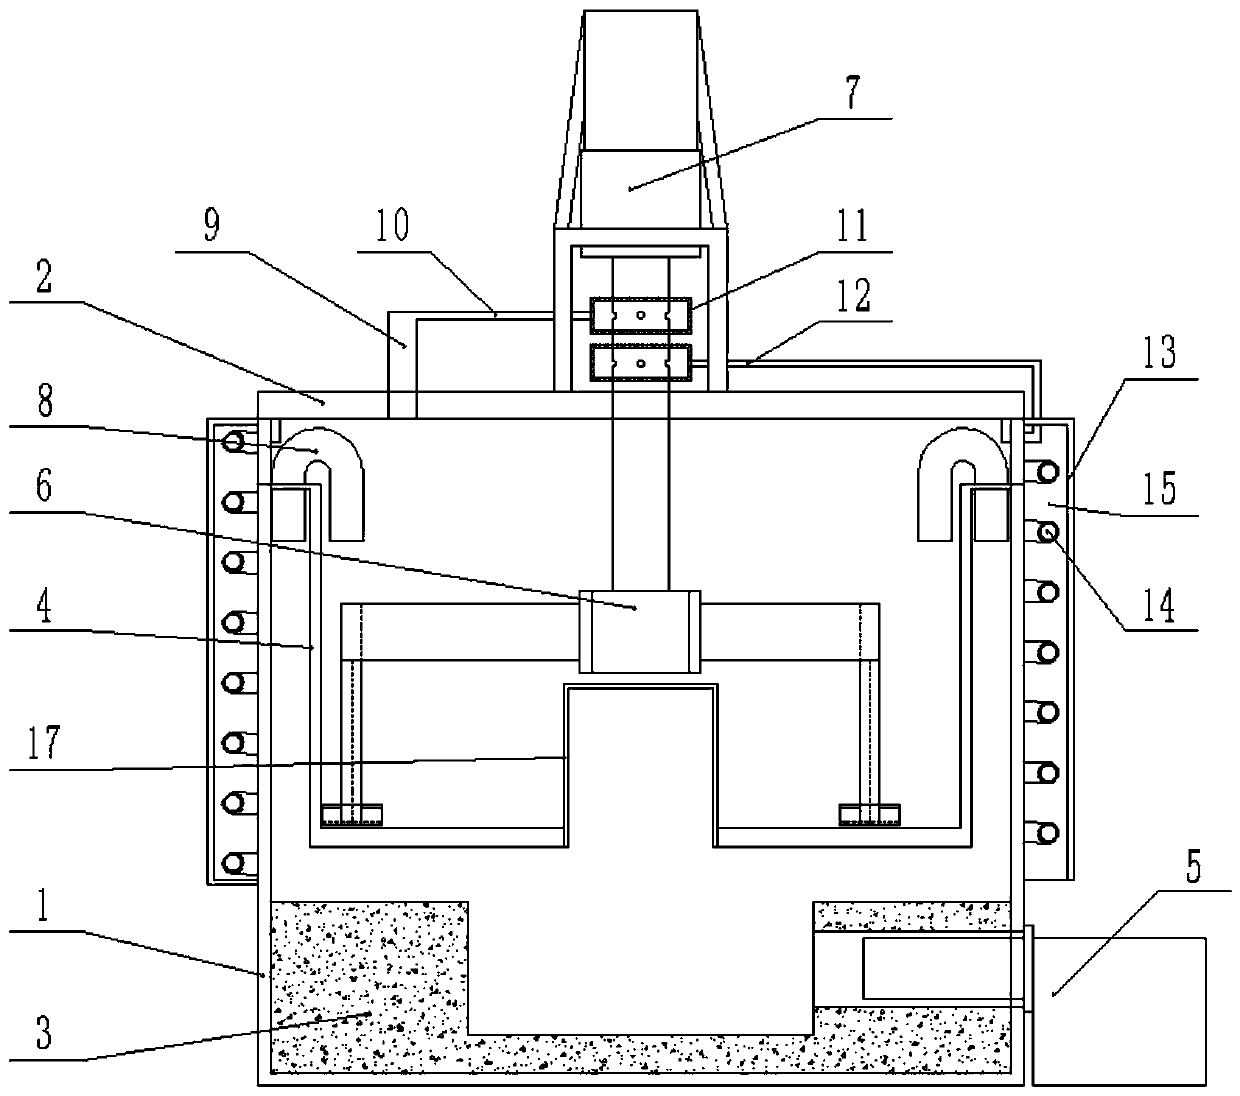 Vertical mixing and heating device for mixing and stirring materials